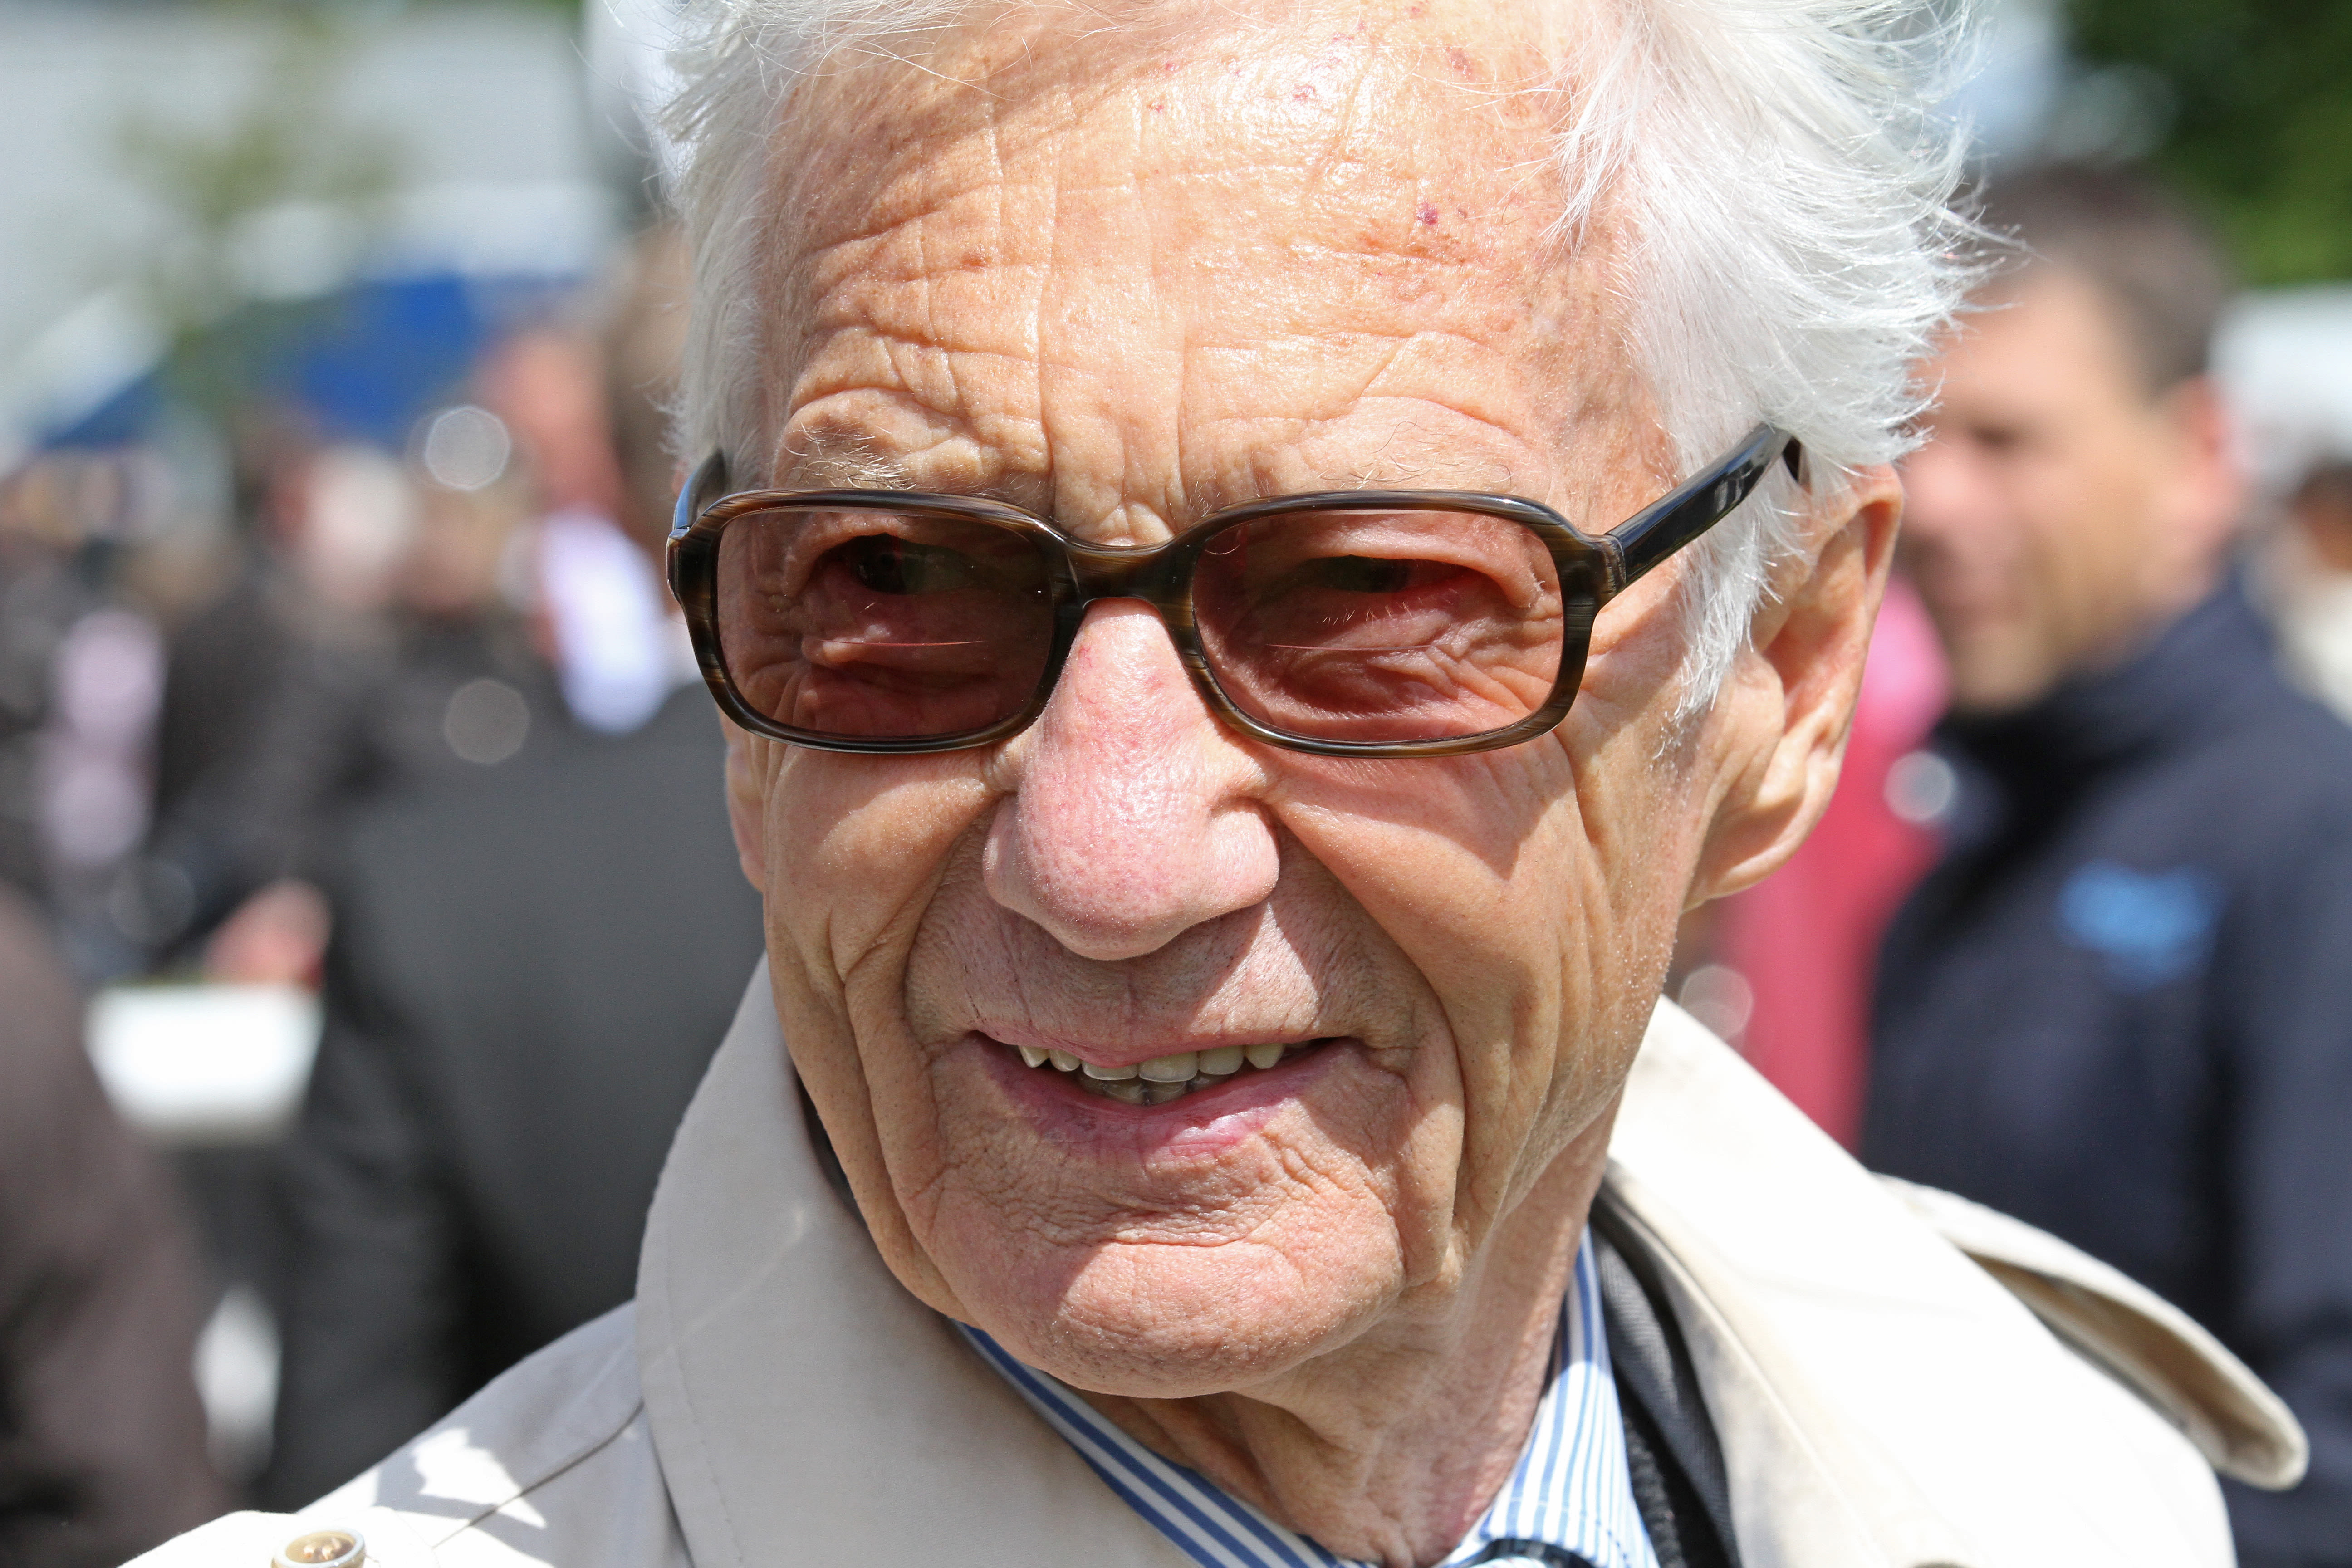 Lester Piggott says it is an "honour" to be included in the Qipco British Champion Series Hall of Fame